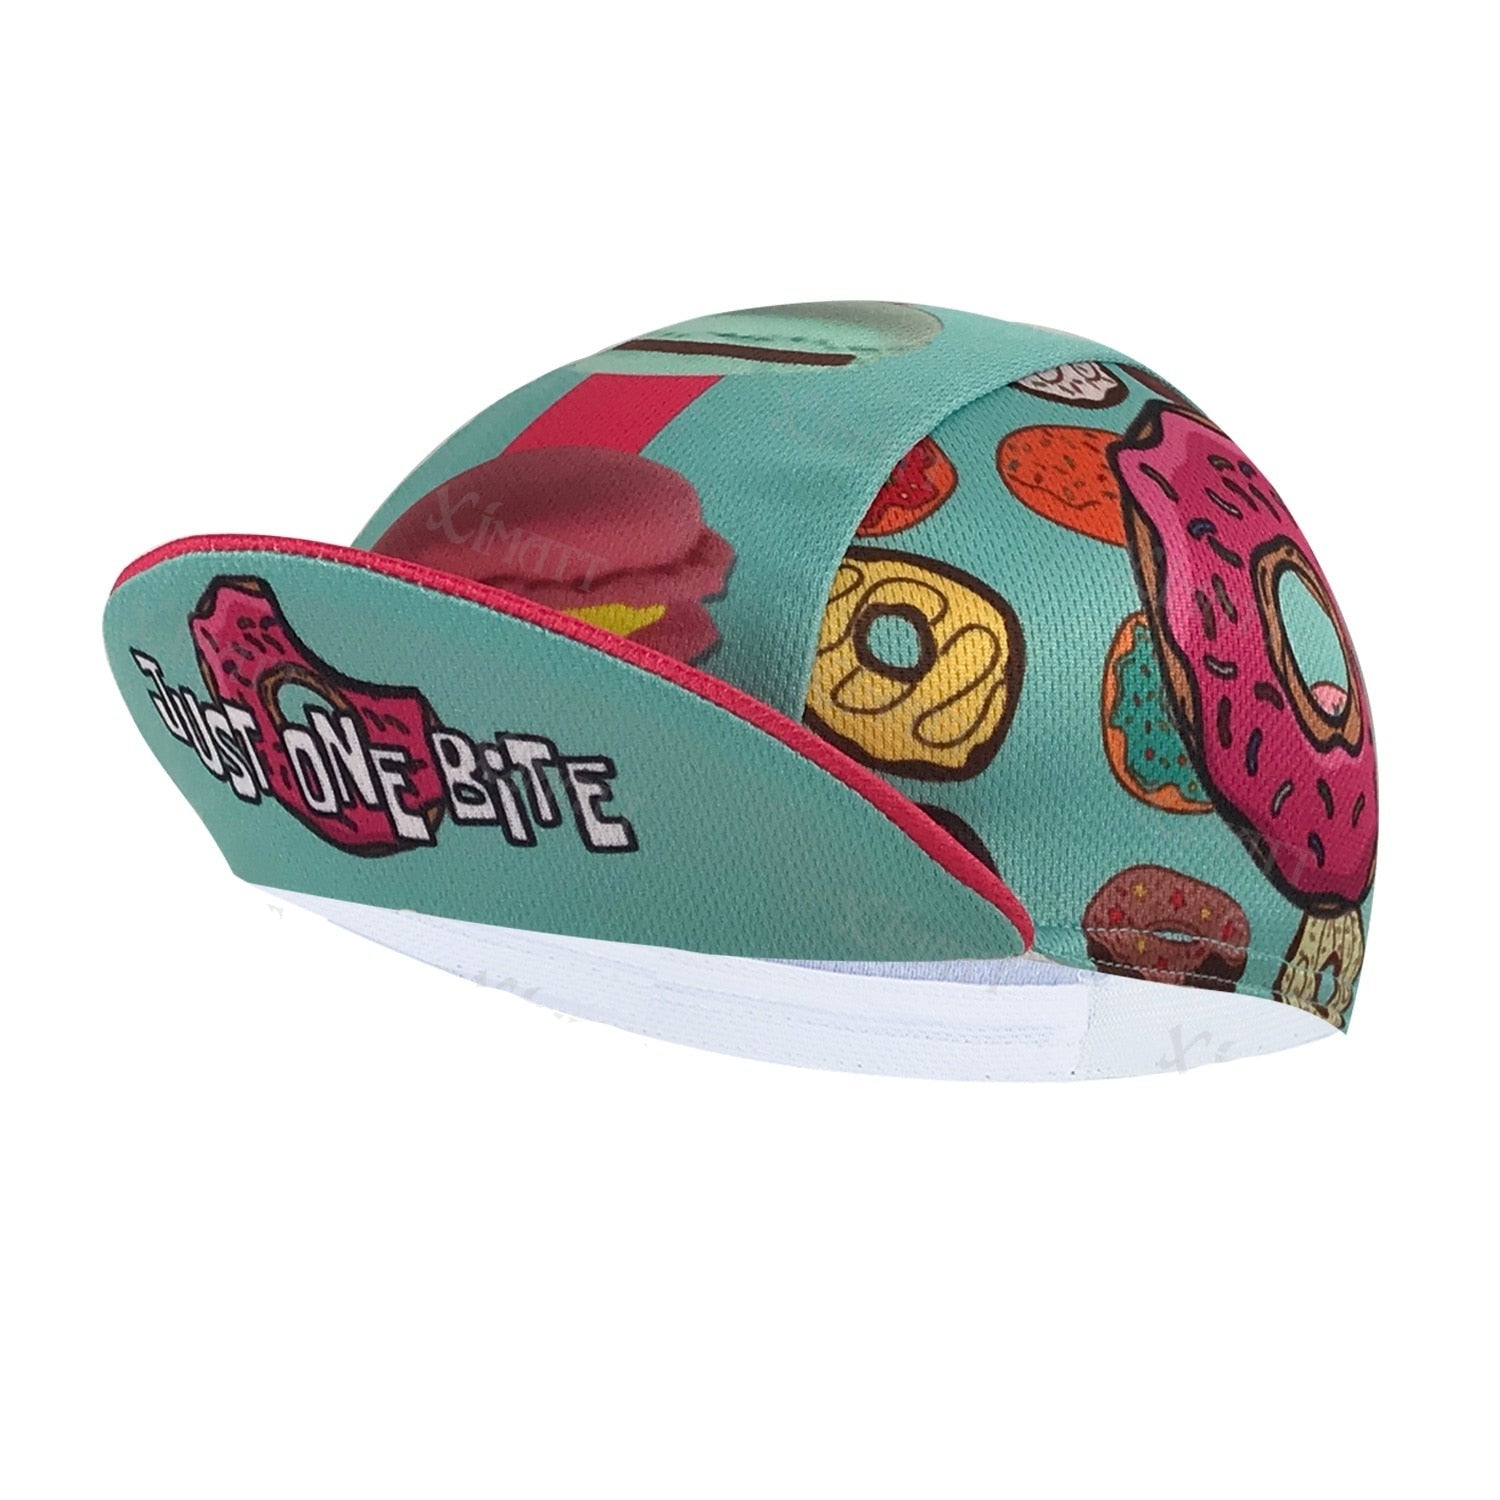 Hamburger Biscuit Cartoon Print  Polyester Bicycle Women's And Men's Caps Quick Drying Summer Sports Bike Hats